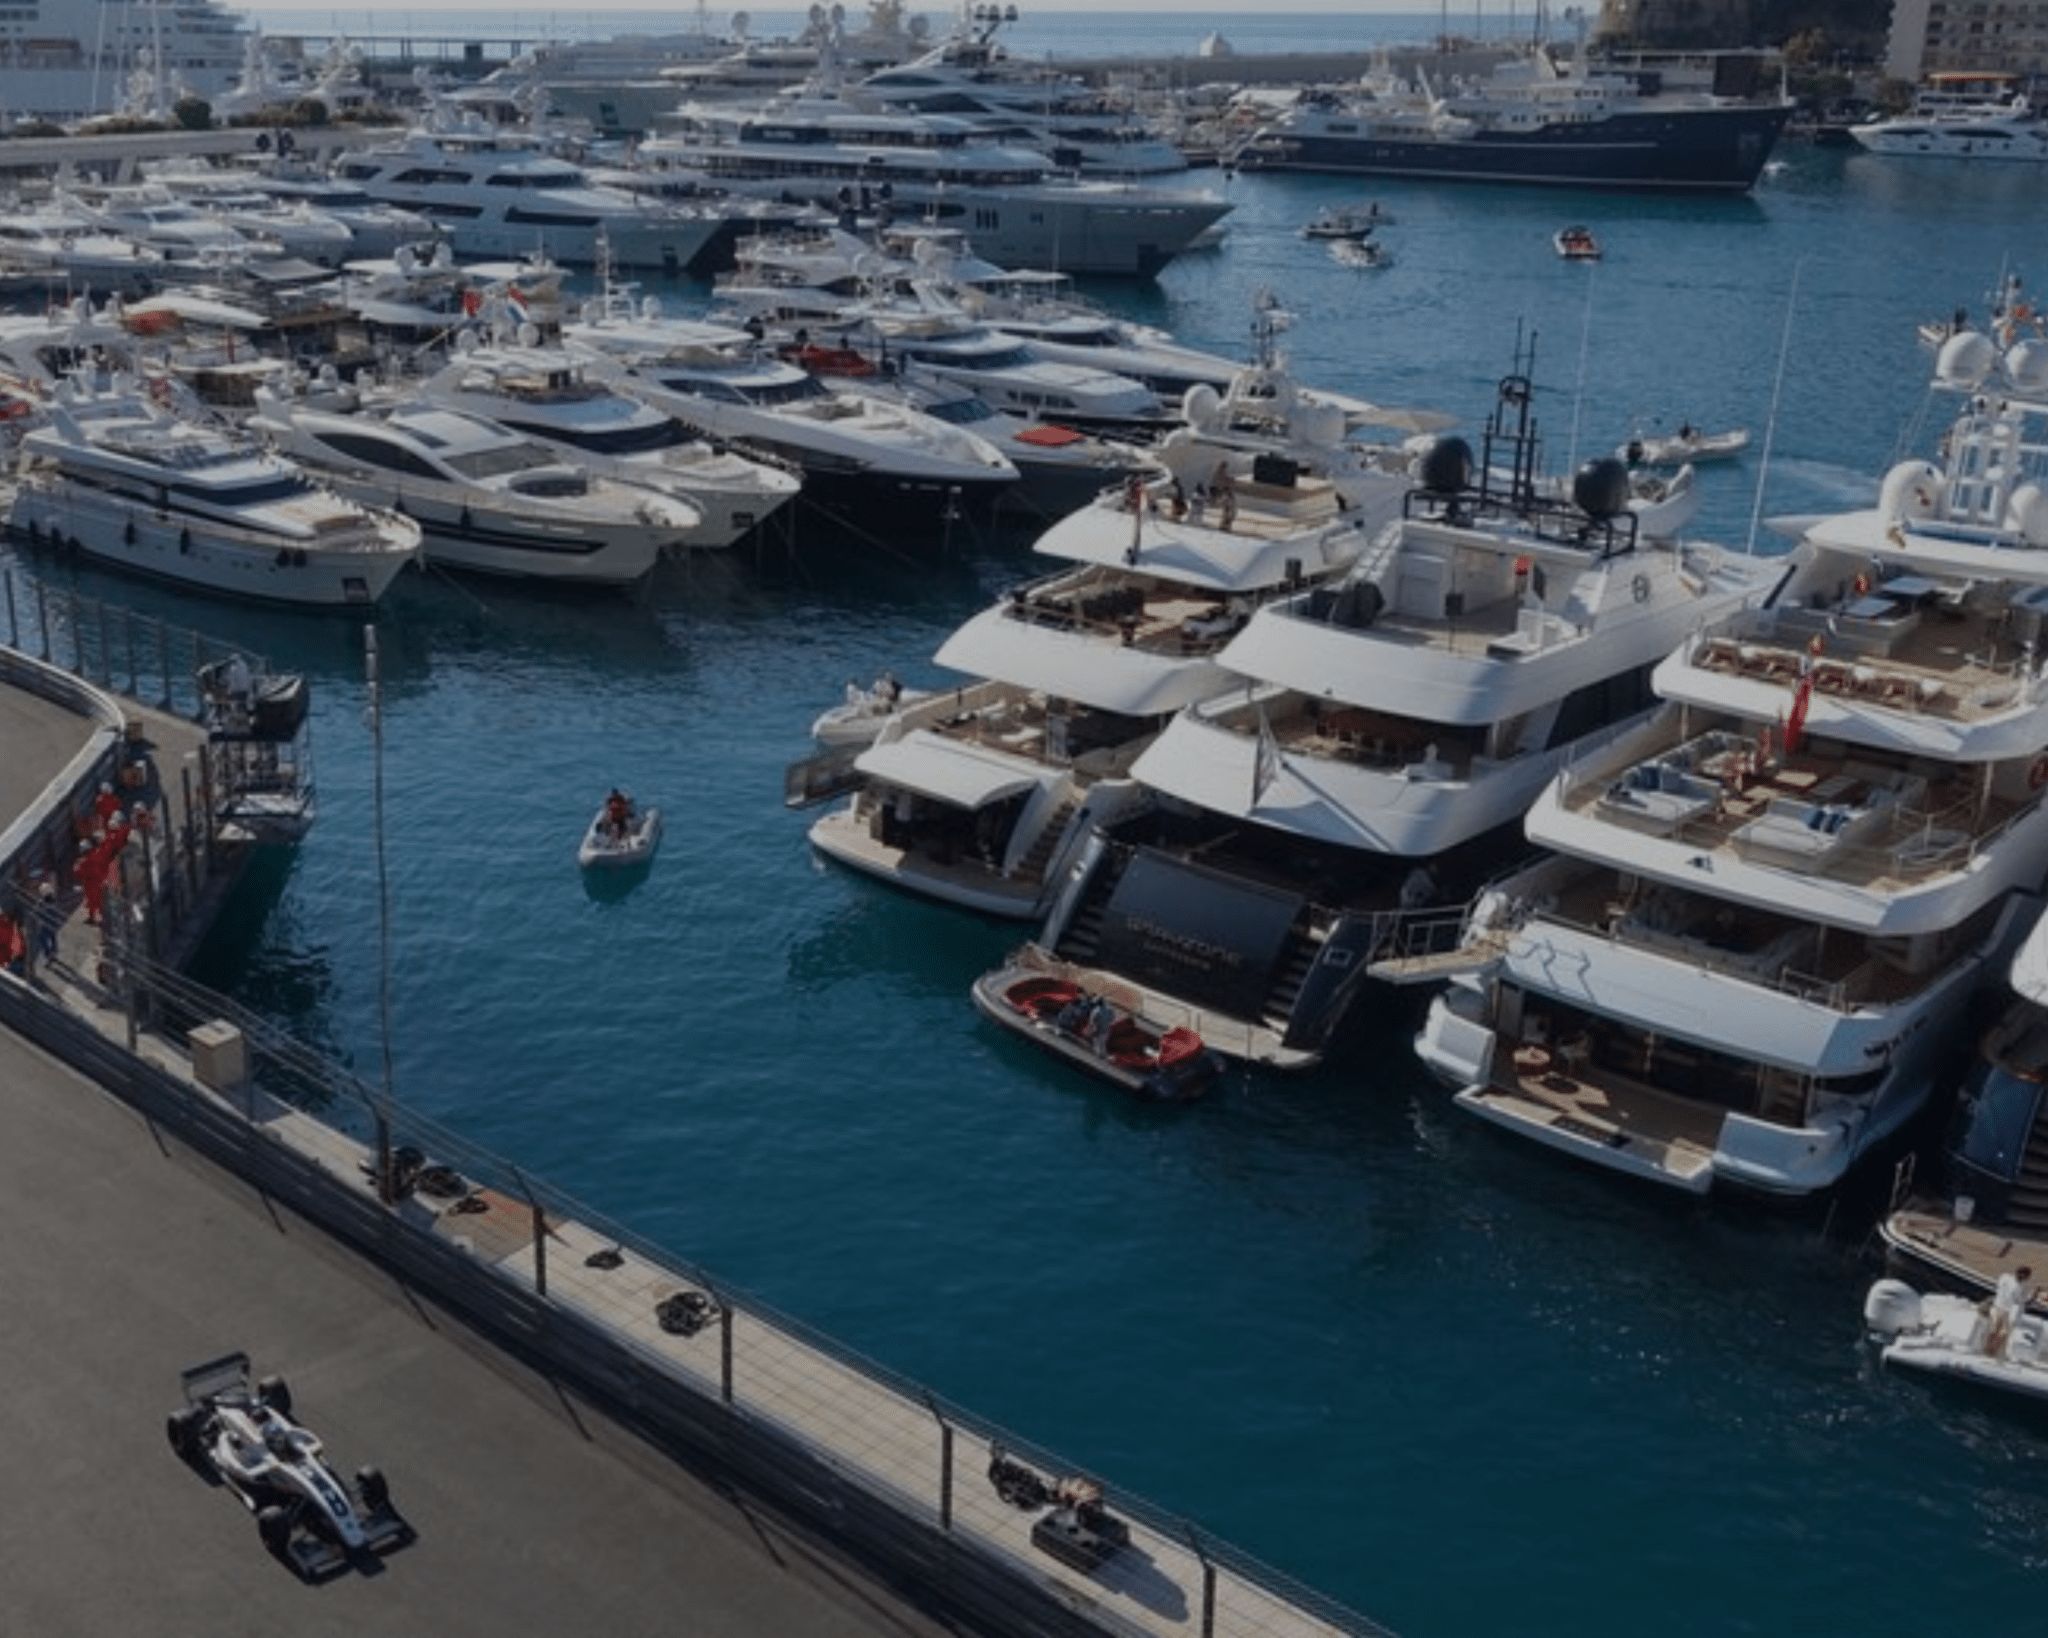 yachts moored up with racing cars going past